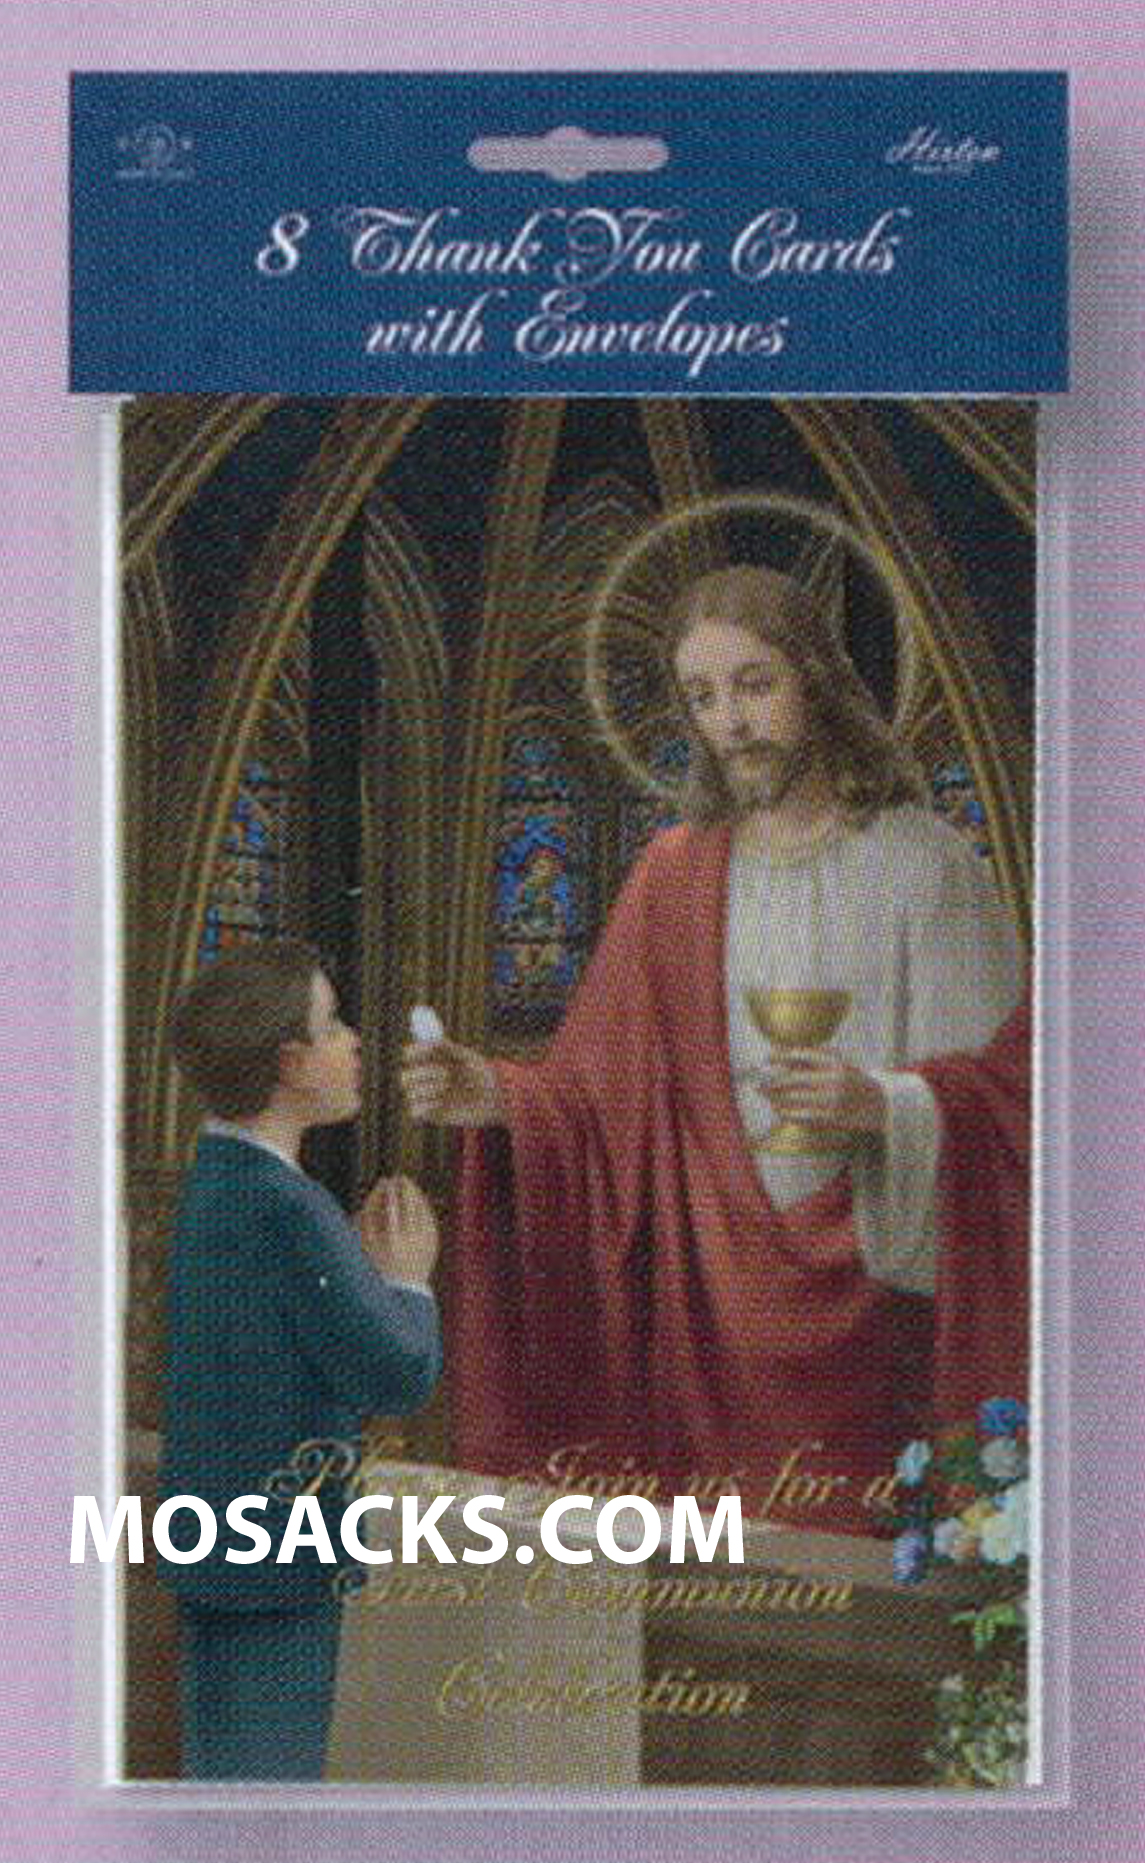 First Communion Child Of God Invitations Boy 12-CI674 is a Boy First Communion Celebration Invitation set of 8: 3-1/2" x 5-1/4" gold-embossed laminated card-stock First Communion Invitations with white envelopes